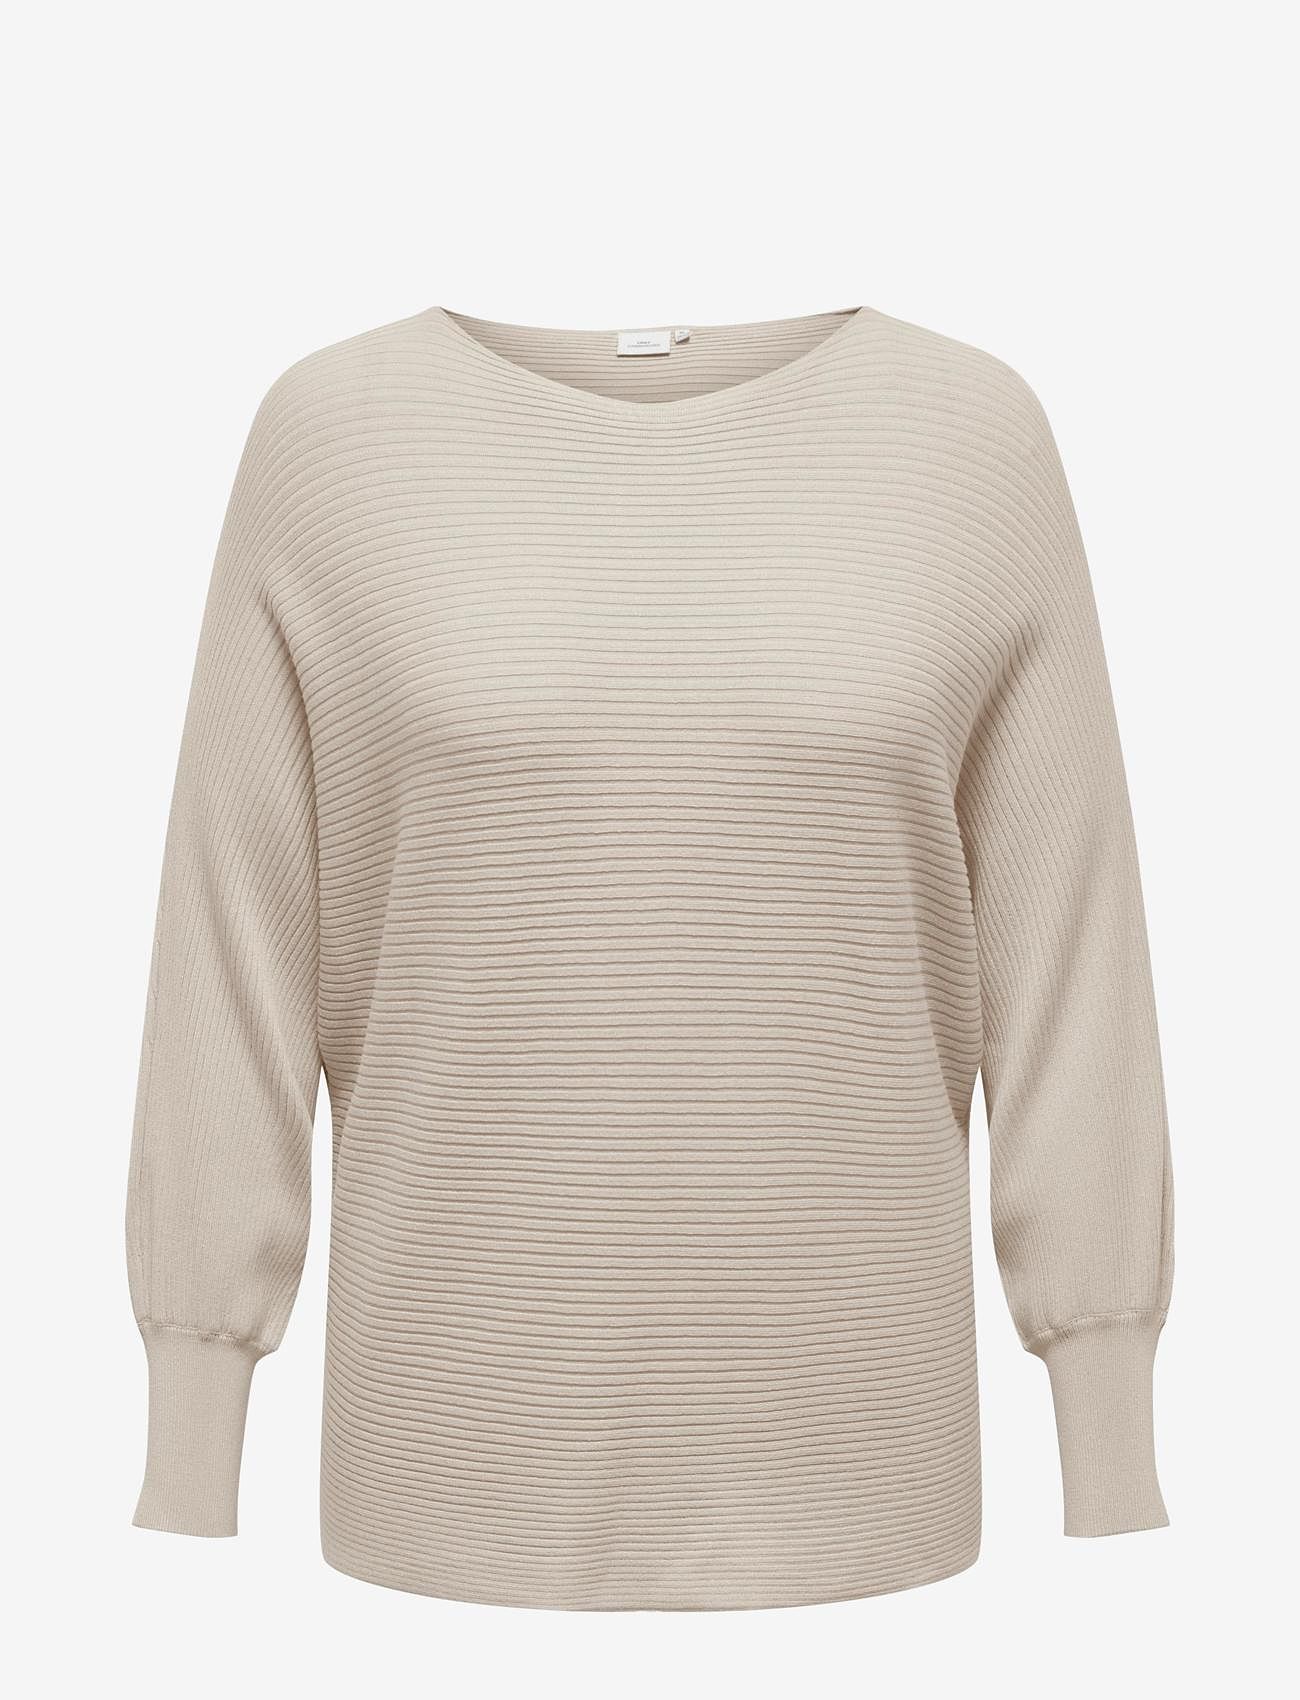 ONLY Carmakoma - CARNEW ADALINE L/S PULLOVER KNT - jumpers - pumice stone - 0